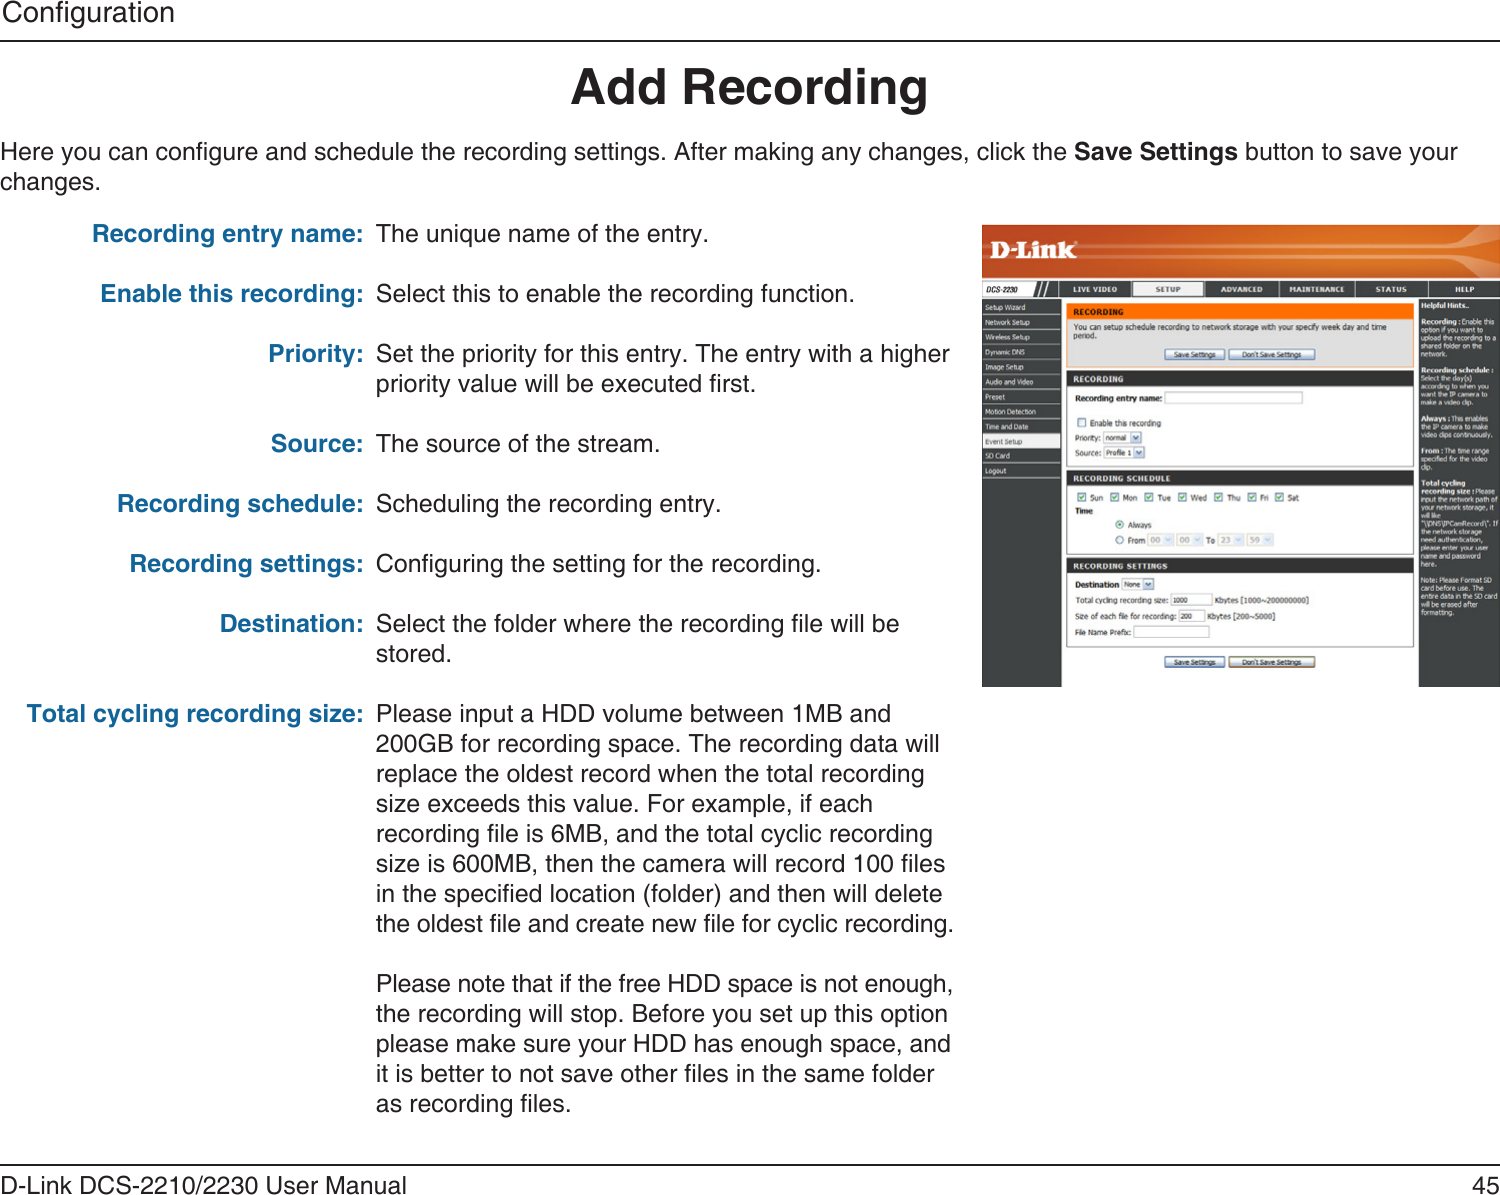 45D-Link DCS-2210/2230 User ManualCongurationAdd RecordingRecording entry name:Enable this recording:Priority:Source:Recording schedule:Recording settings:Destination:Total cycling recording size:The unique name of the entry.Select this to enable the recording function.Set the priority for this entry. The entry with a higher priority value will be executed rst.The source of the stream.Scheduling the recording entry.Conguring the setting for the recording.Select the folder where the recording le will be stored.Please input a HDD volume between 1MB and 200GB for recording space. The recording data will replace the oldest record when the total recording size exceeds this value. For example, if each recording le is 6MB, and the total cyclic recording size is 600MB, then the camera will record 100 les  in the specied location (folder) and then will delete  the oldest le and create new le for cyclic recording.Please note that if the free HDD space is not enough, the recording will stop. Before you set up this option please make sure your HDD has enough space, and  it is better to not save other les in the same folder as recording les. Here you can congure and schedule the recording settings. After making any changes, click the Save Settings button to save your changes.